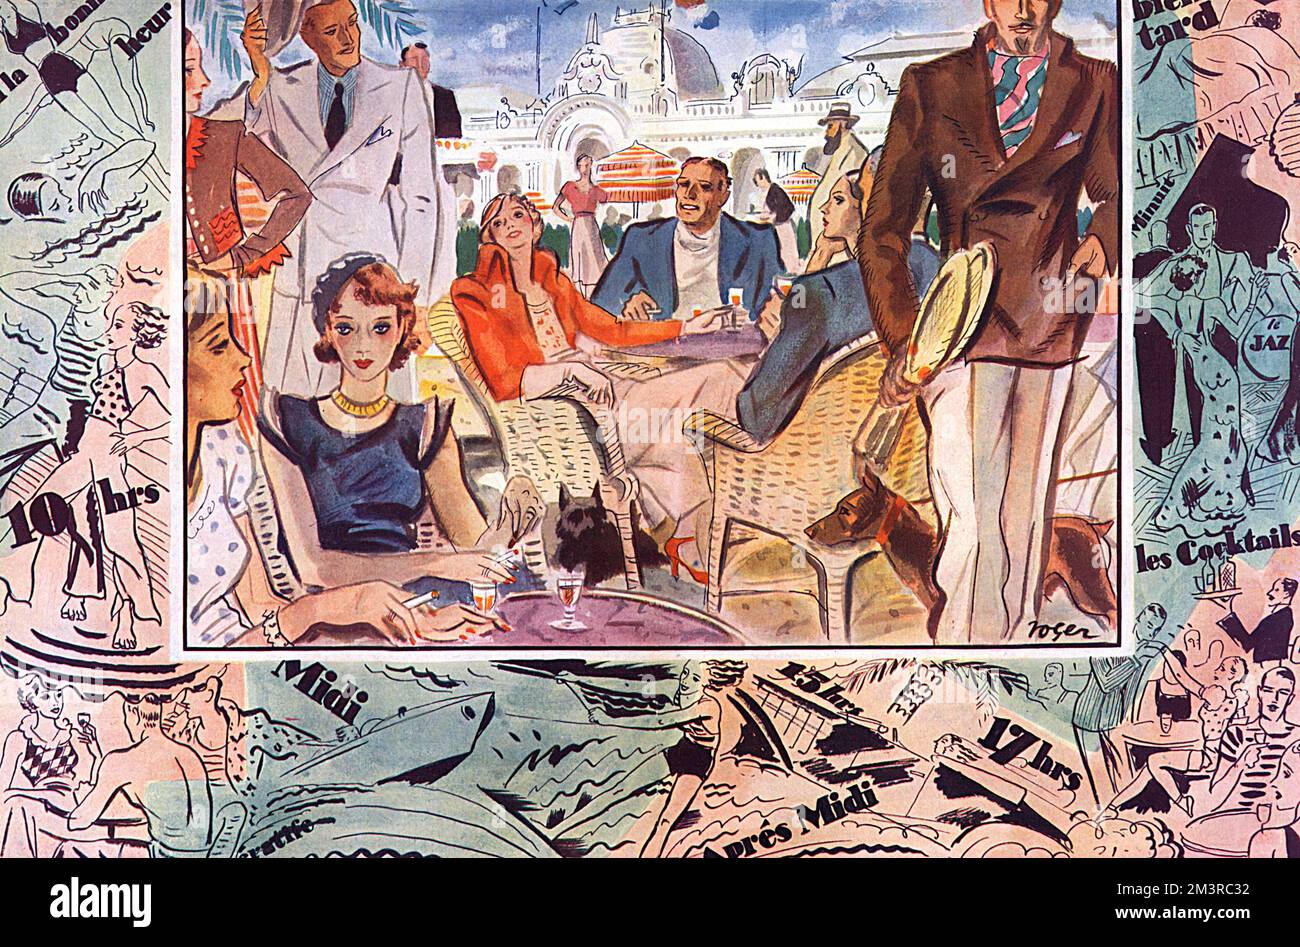 Ici on s'amuse bien tout le jour by Roger Furse.  Illustration showing smart society enjoying the pleasures of the French Riviera during the 1930s at Monte Carlo with the Casino in the background.  The montage border represents the endless entertainment available on the Cote d'Azur for those with the means to enjoy such pleasures.   1932 Stock Photo